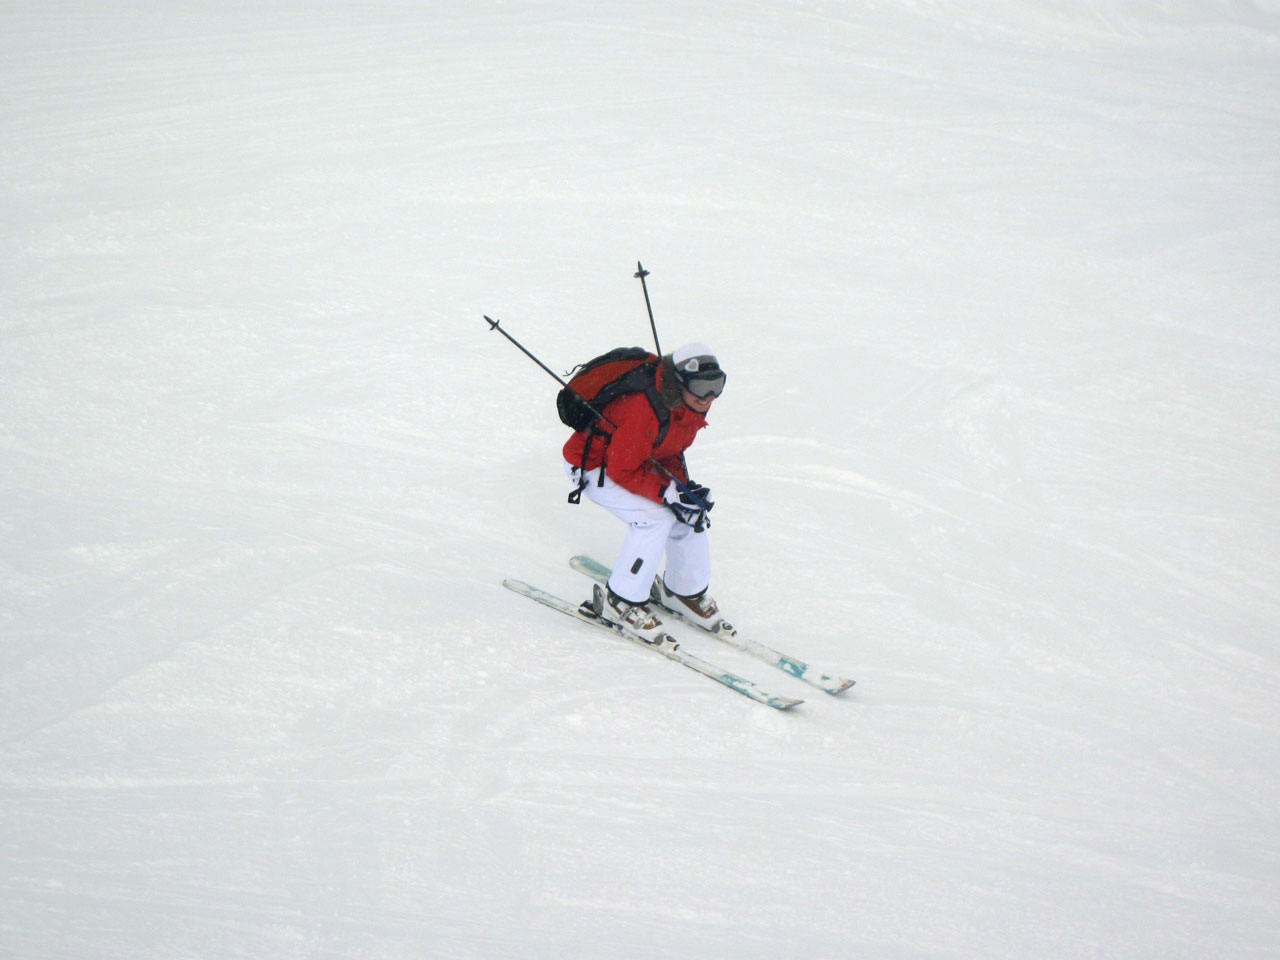 Skiing On Slope